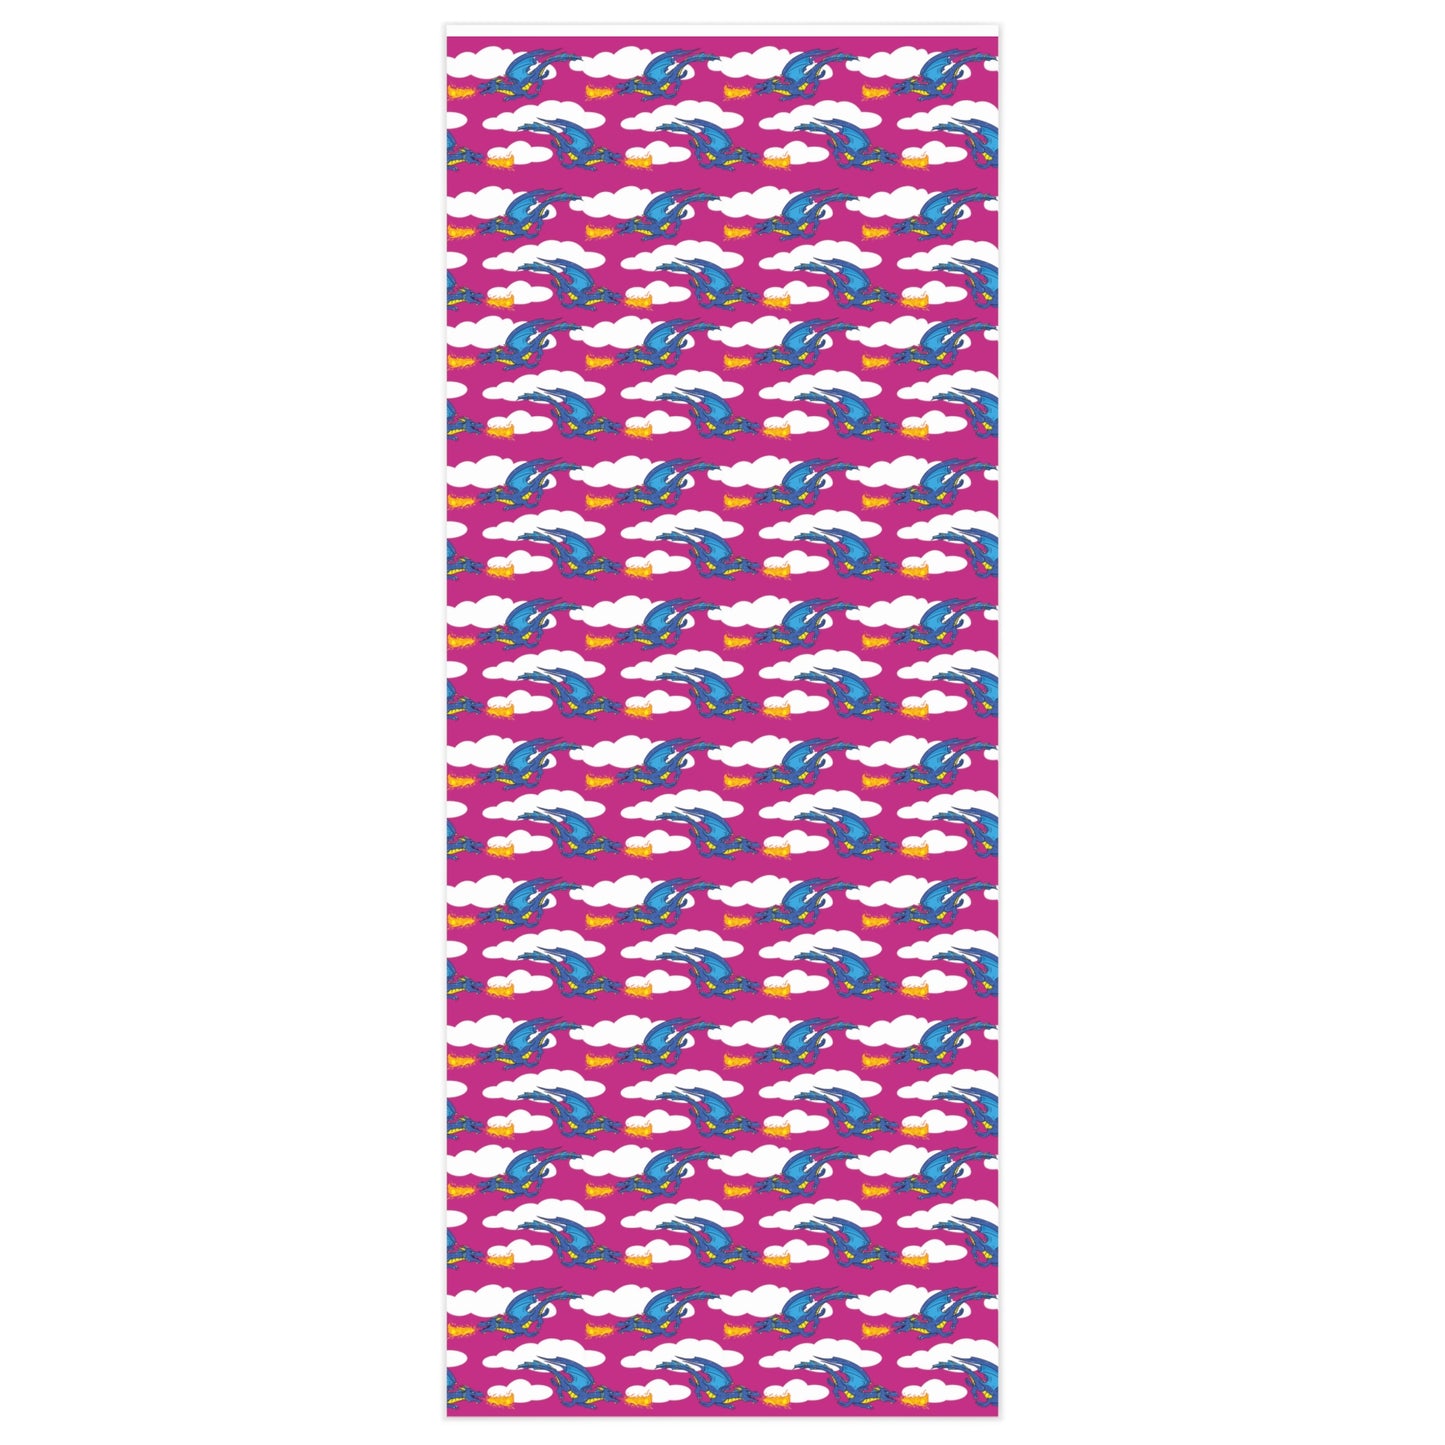 "Fire Dragon in the Clouds" in Lavender - Wrapping Paper (2 sizes)